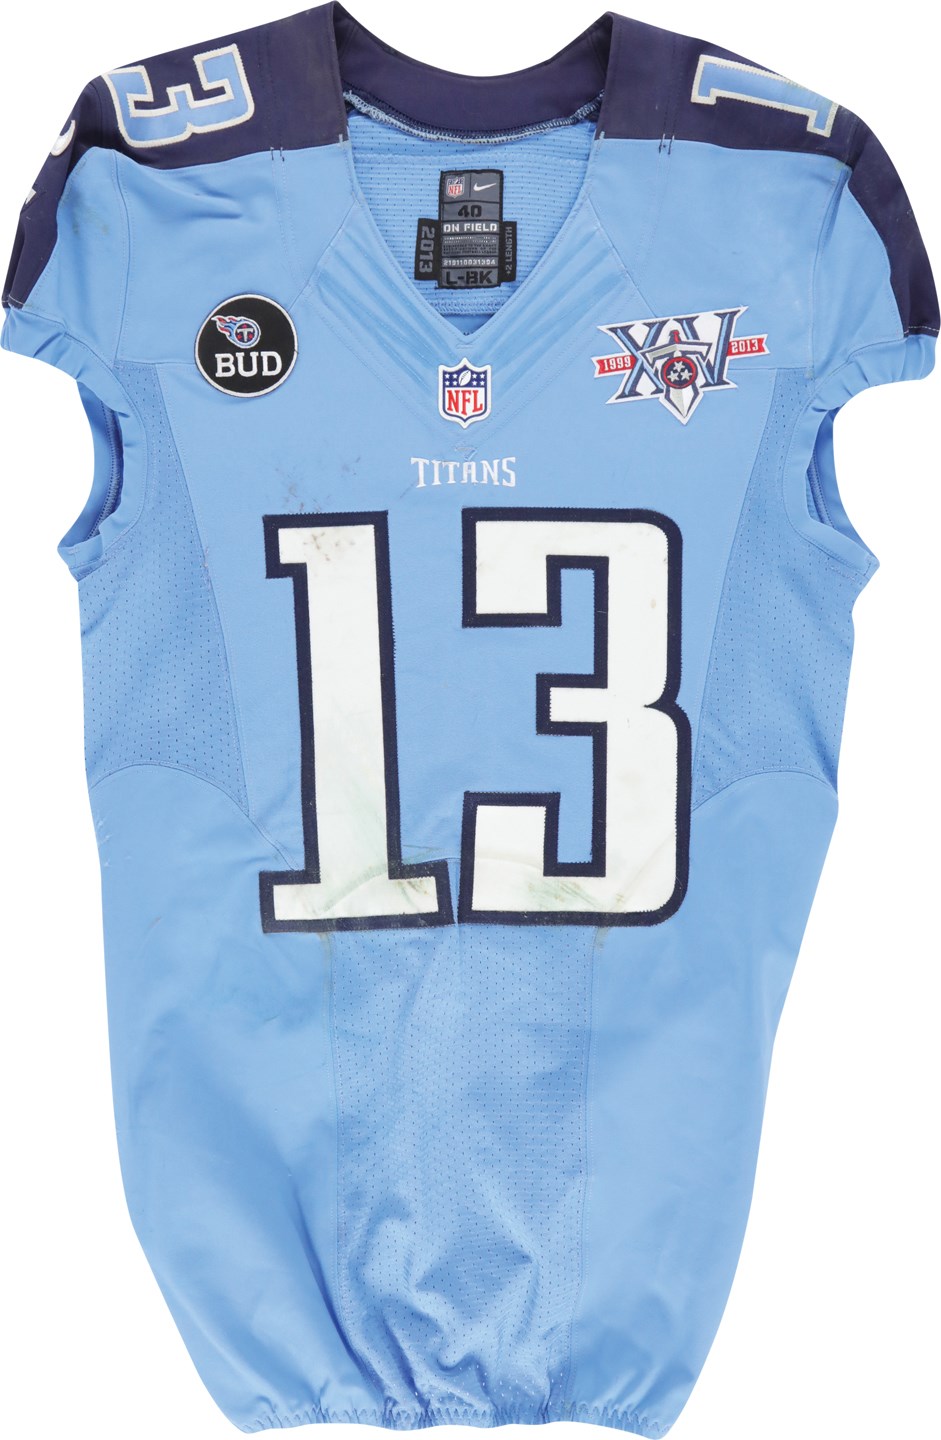 Football - 12/15/13 Kendall Wright Baby Blue Tennessee Titans Unwashed Game Worn Jersey - Career High 150 Yard Game (Photo-Matched)